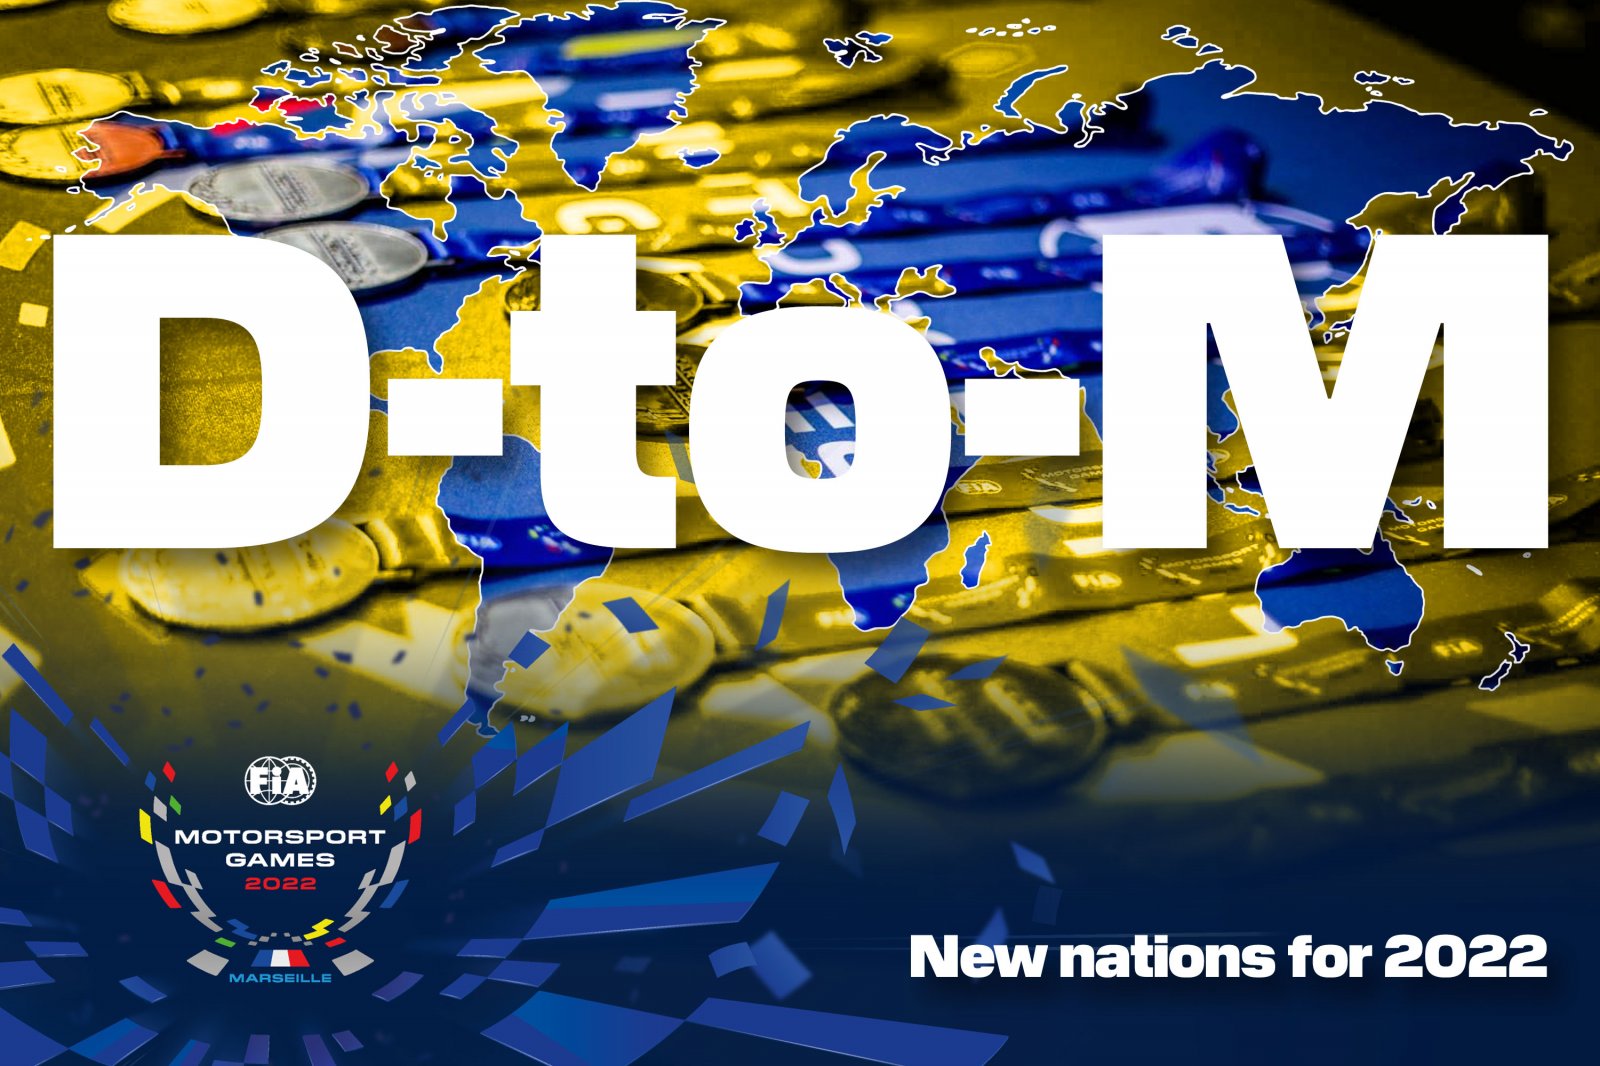 FIA Motorsport Games New Nations A-Z: Greece to Mozambique 